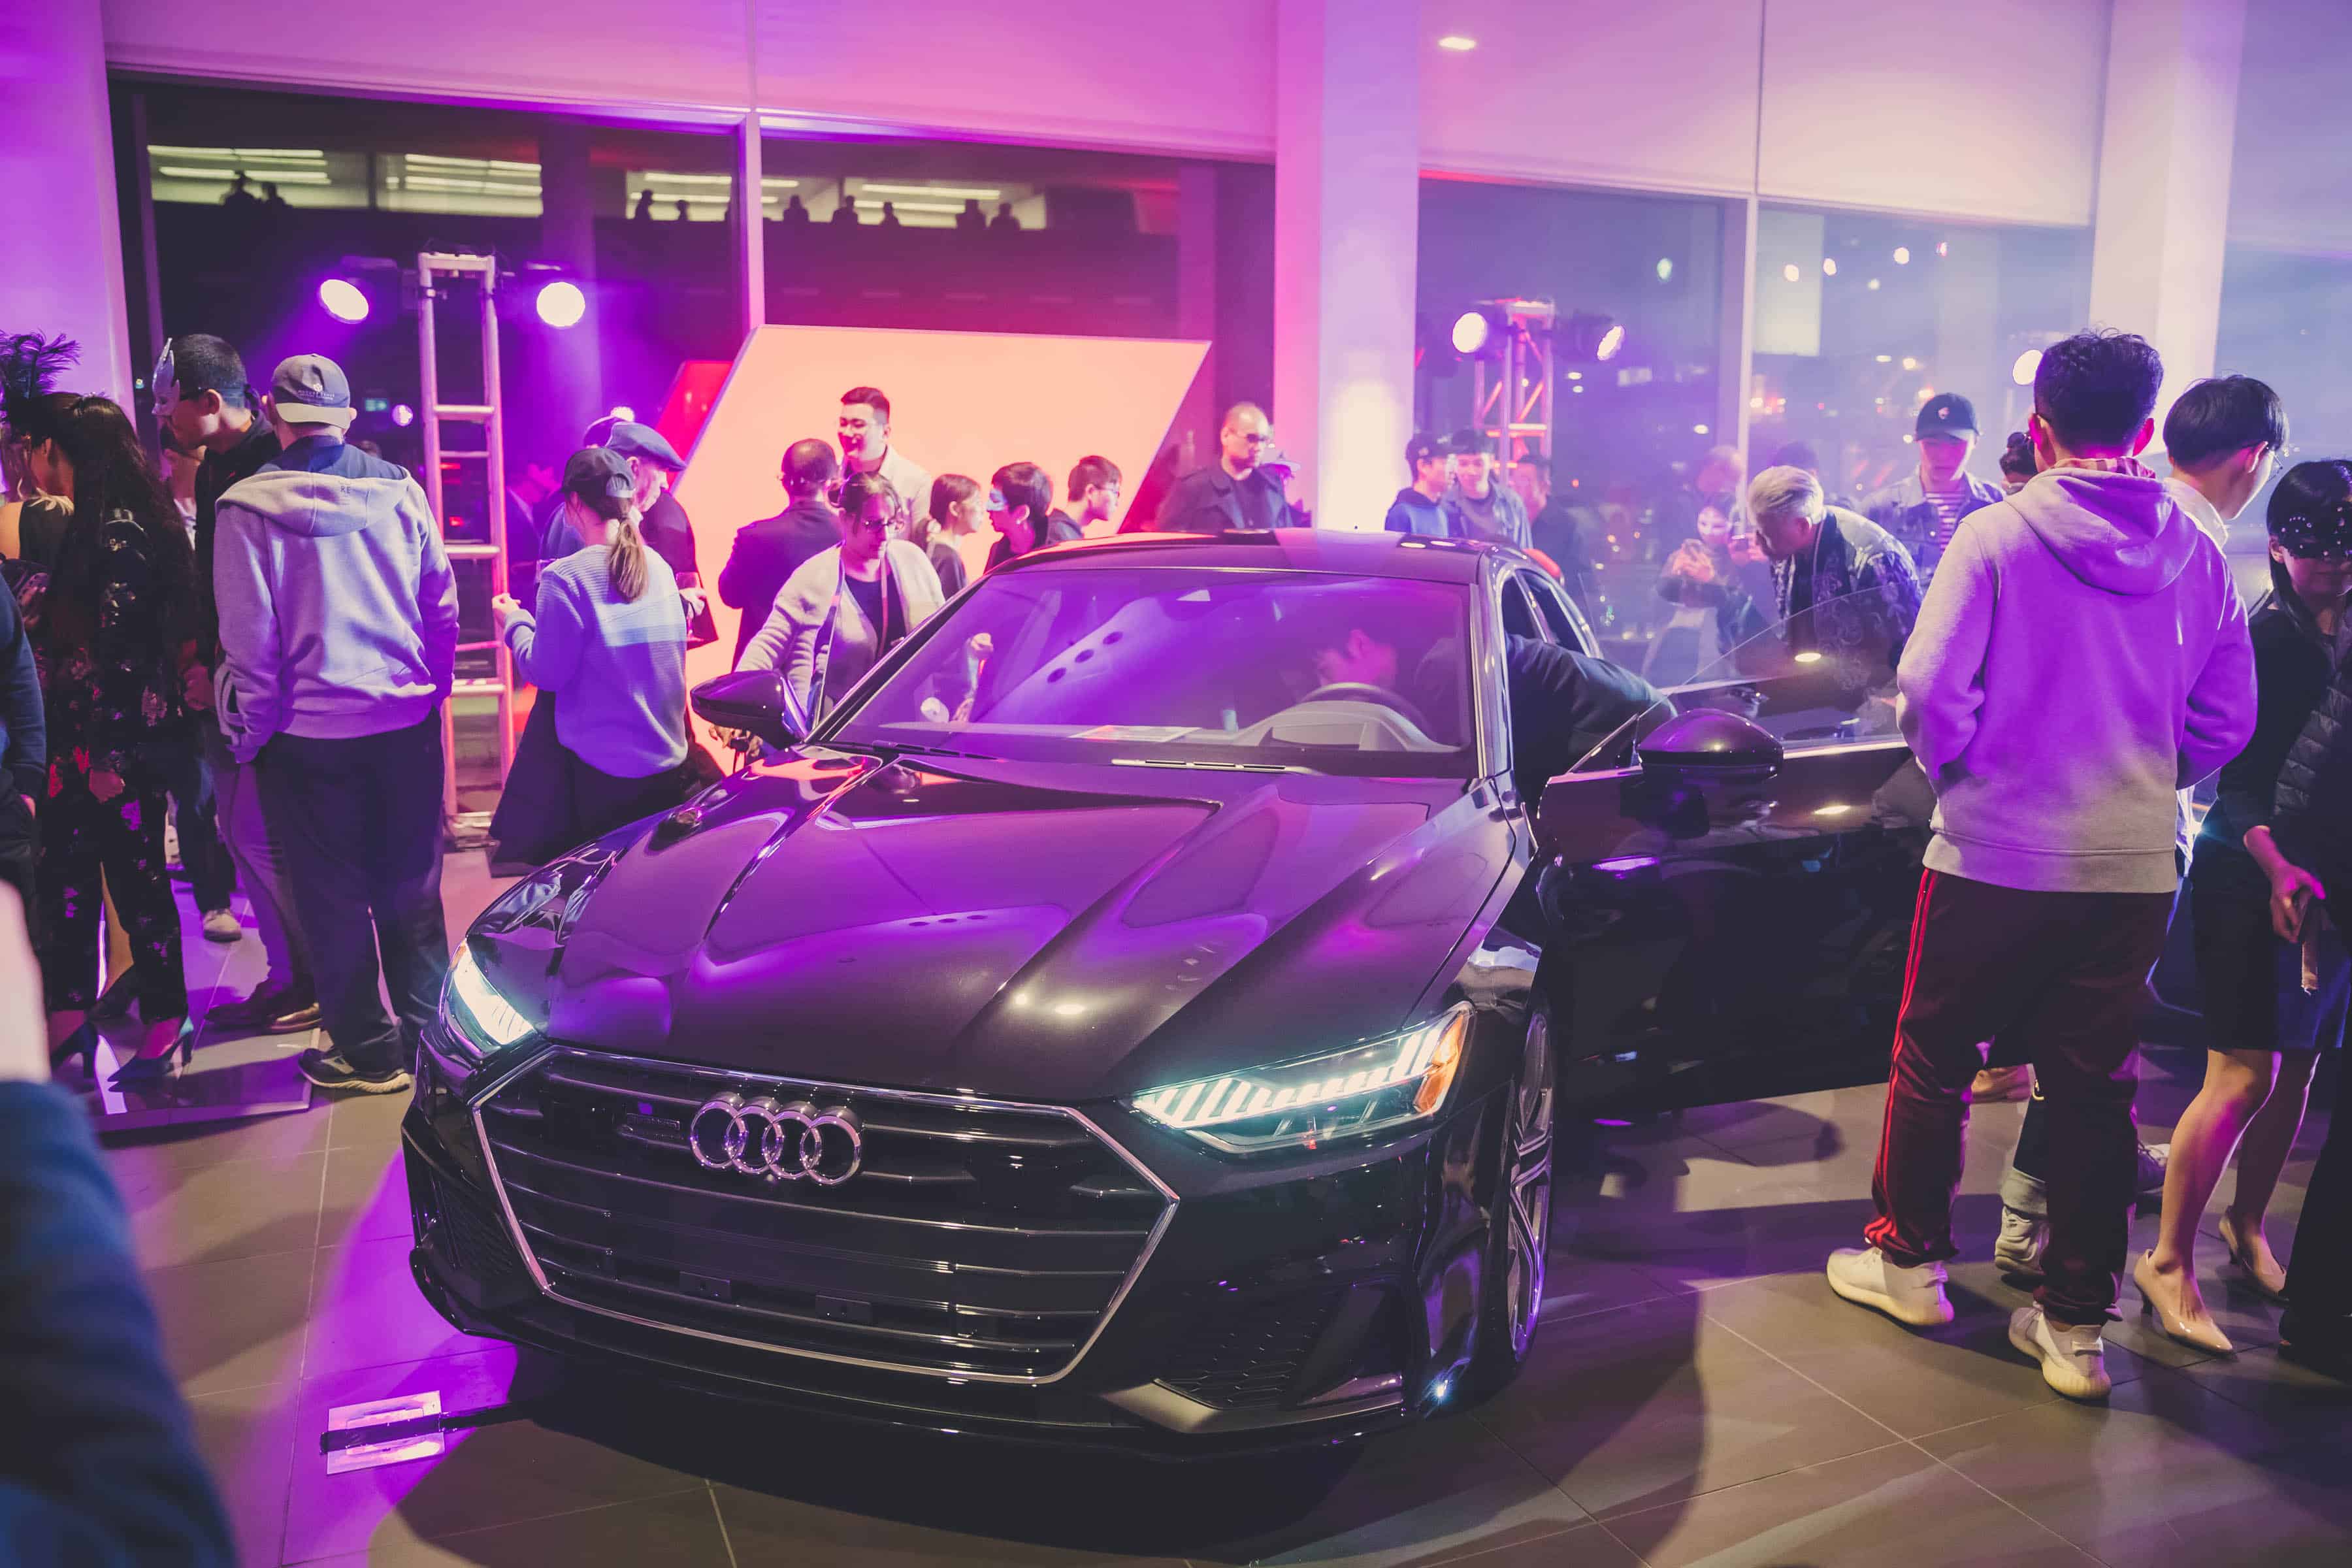 Open Road Audi, Unmask Perfection, 2019 Launch Event, Burnaby, Vancouver, BC, Luxury Cars, Vancity, YVR, 604, BC, tanis sullivan, Christian Chia, Helen Siwak, EcoLuxLuv, Luxury Lifestyle, Luxury Cars,